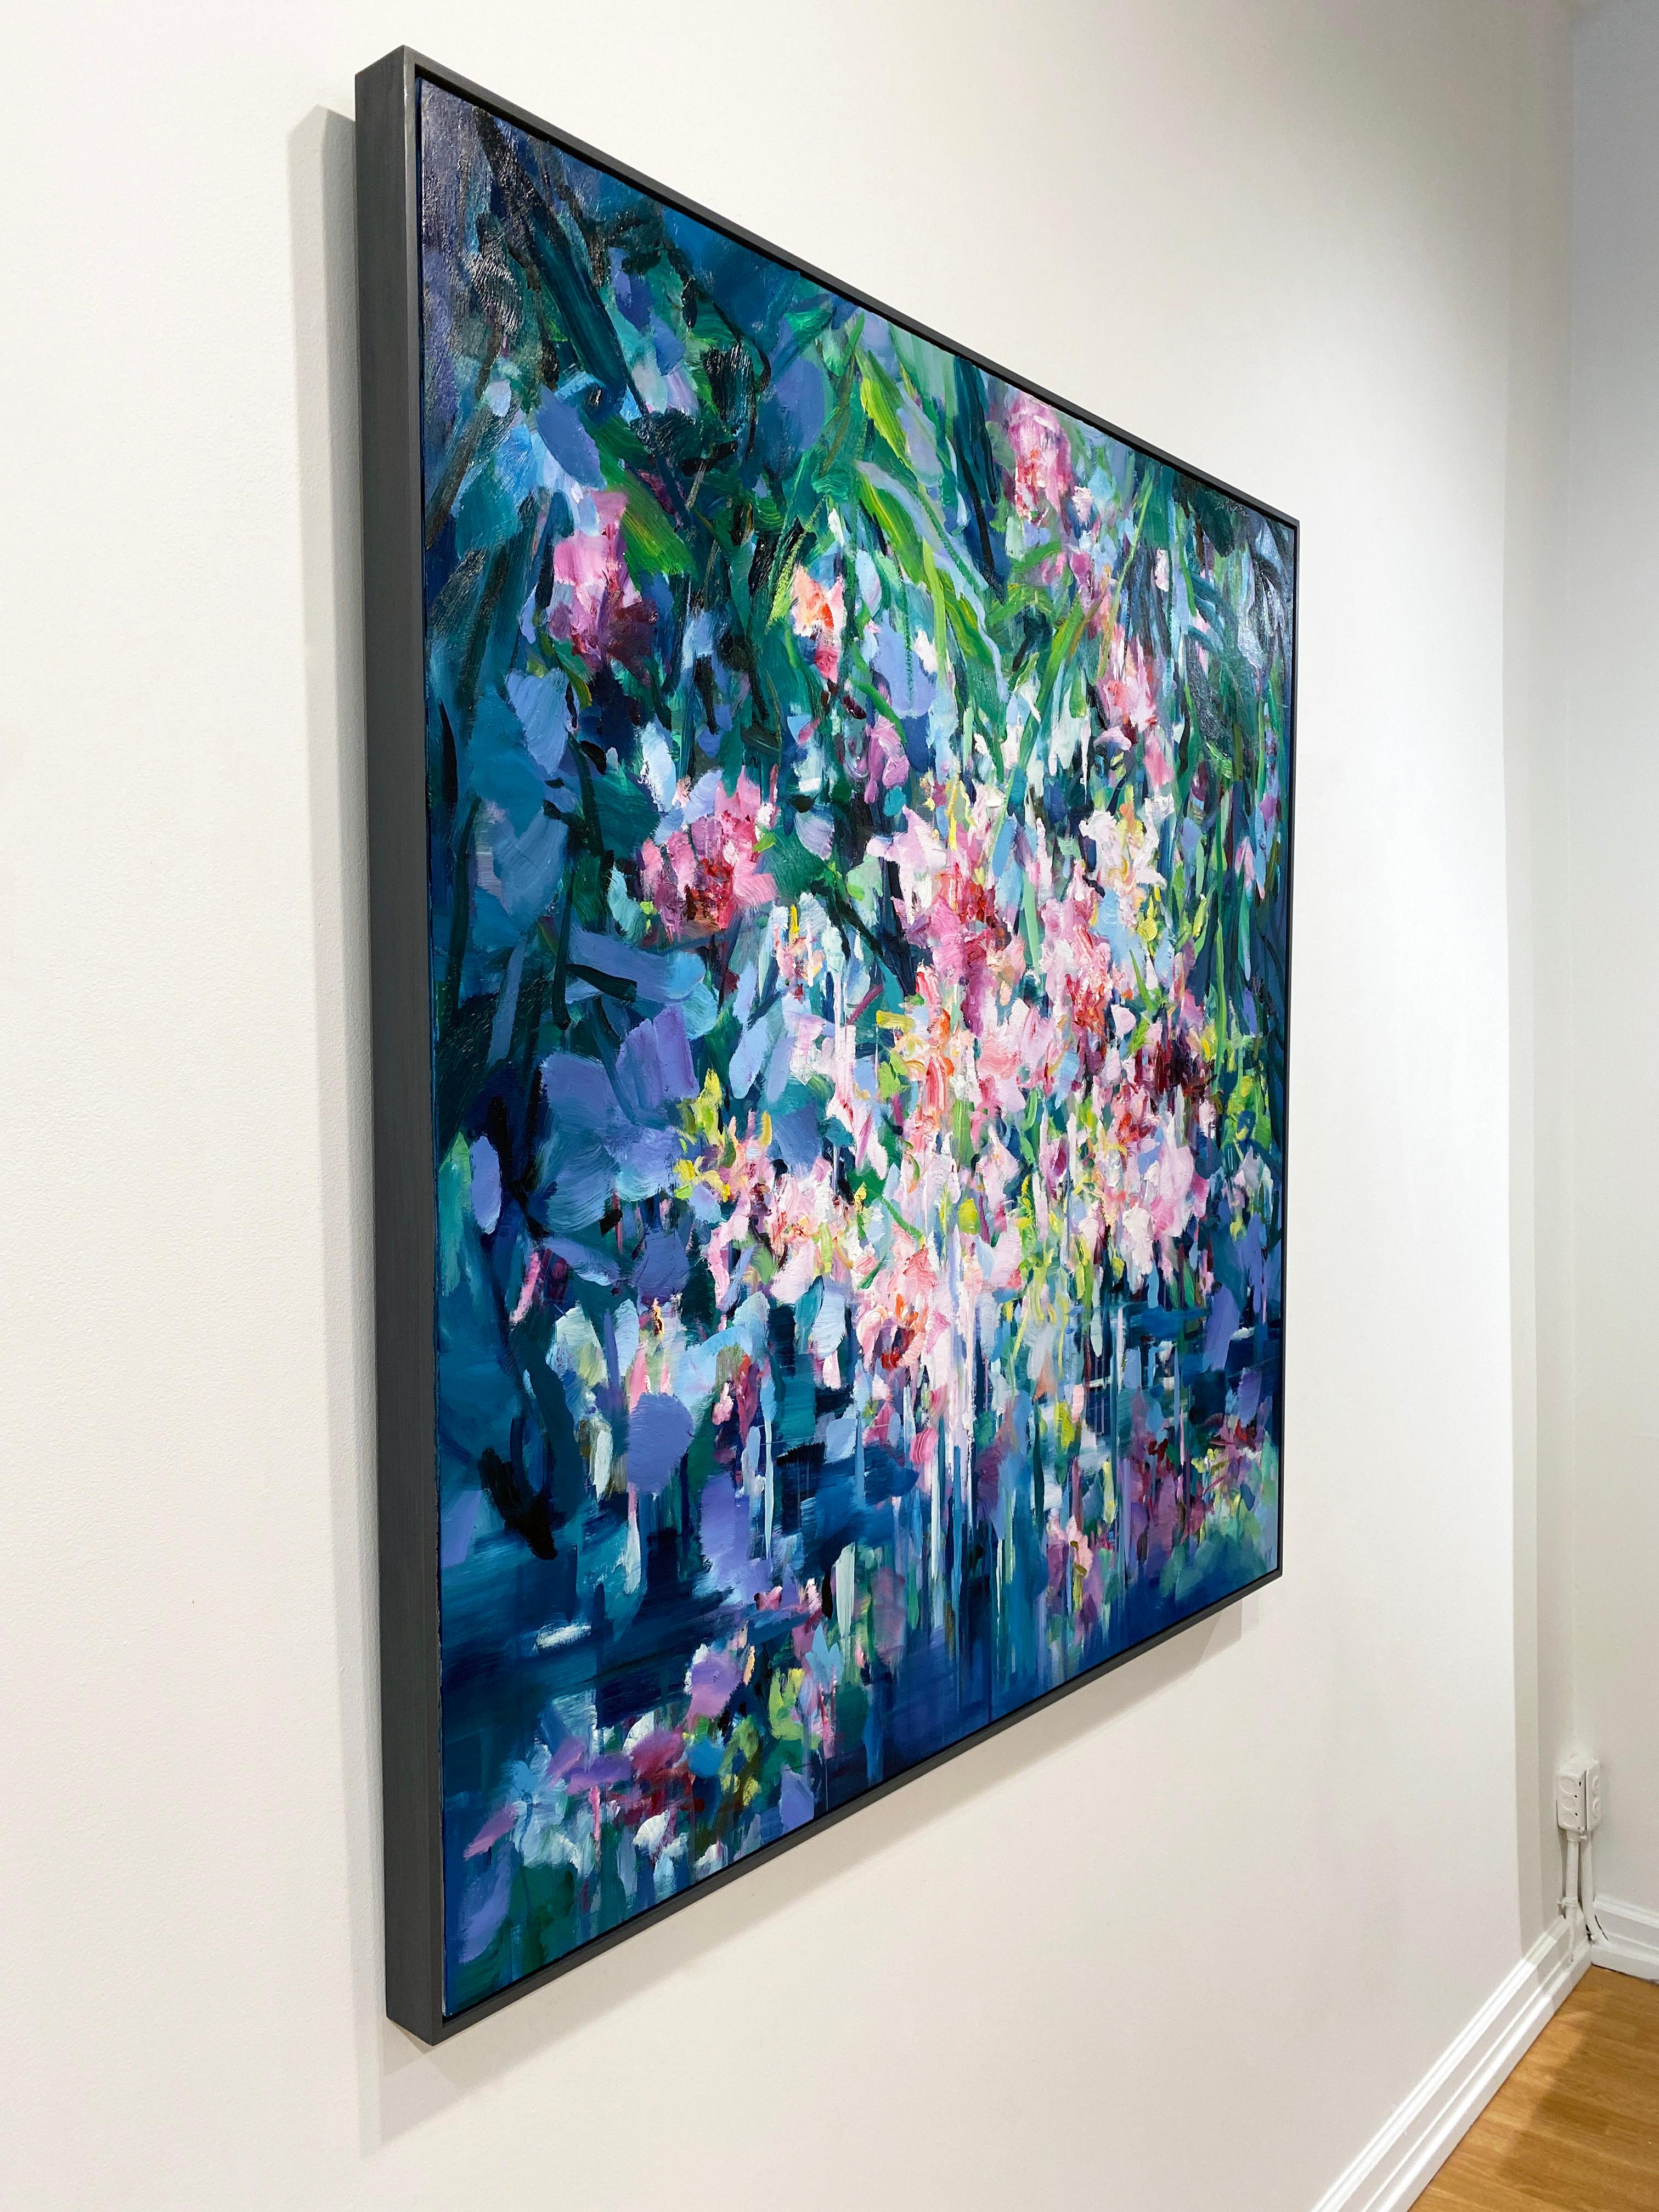 'Forest Song' 2022 by Chinese/Canadian artist Yangyang Pan. Oil on canvas, 48 x 48 in. (framed). This beautiful abstract-expressionistic painting incorporates gestural brushstrokes resembling a floral bouquet in bold colors of blue, green, purple,